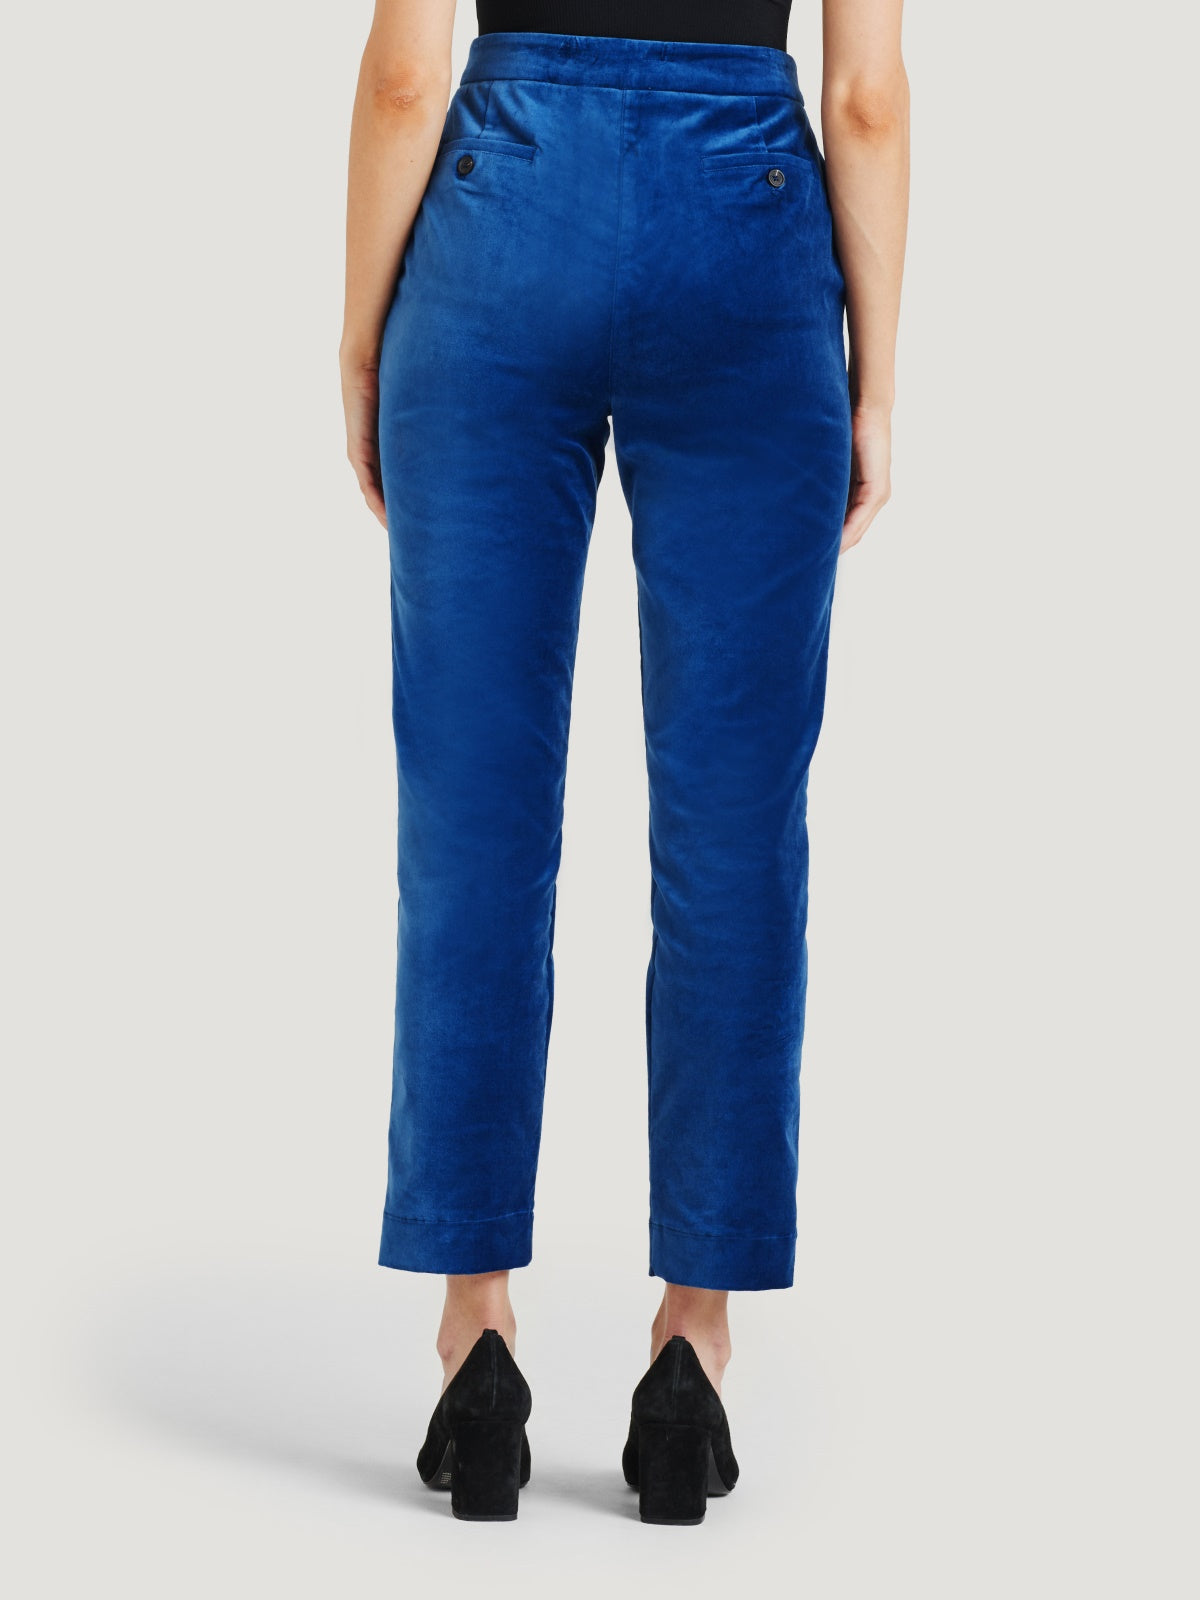 Sapphire Intermix 24 - Daily - DYED CAMBRIC TROUSERS 0U2DDY24V03T –  Nainpreet - The Collective